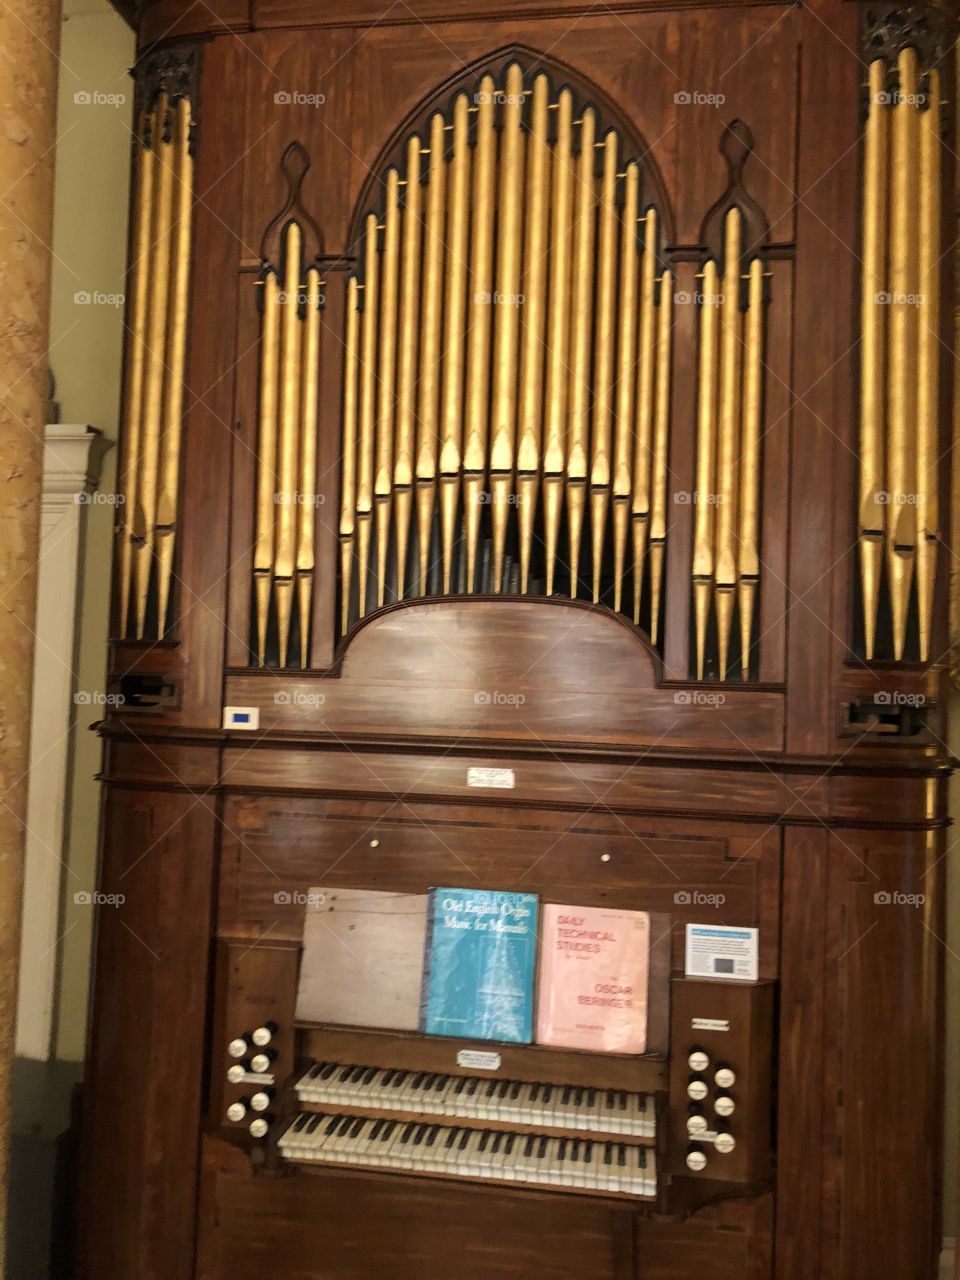 A very beautiful organ that would grace any large stately home with a significant presence.